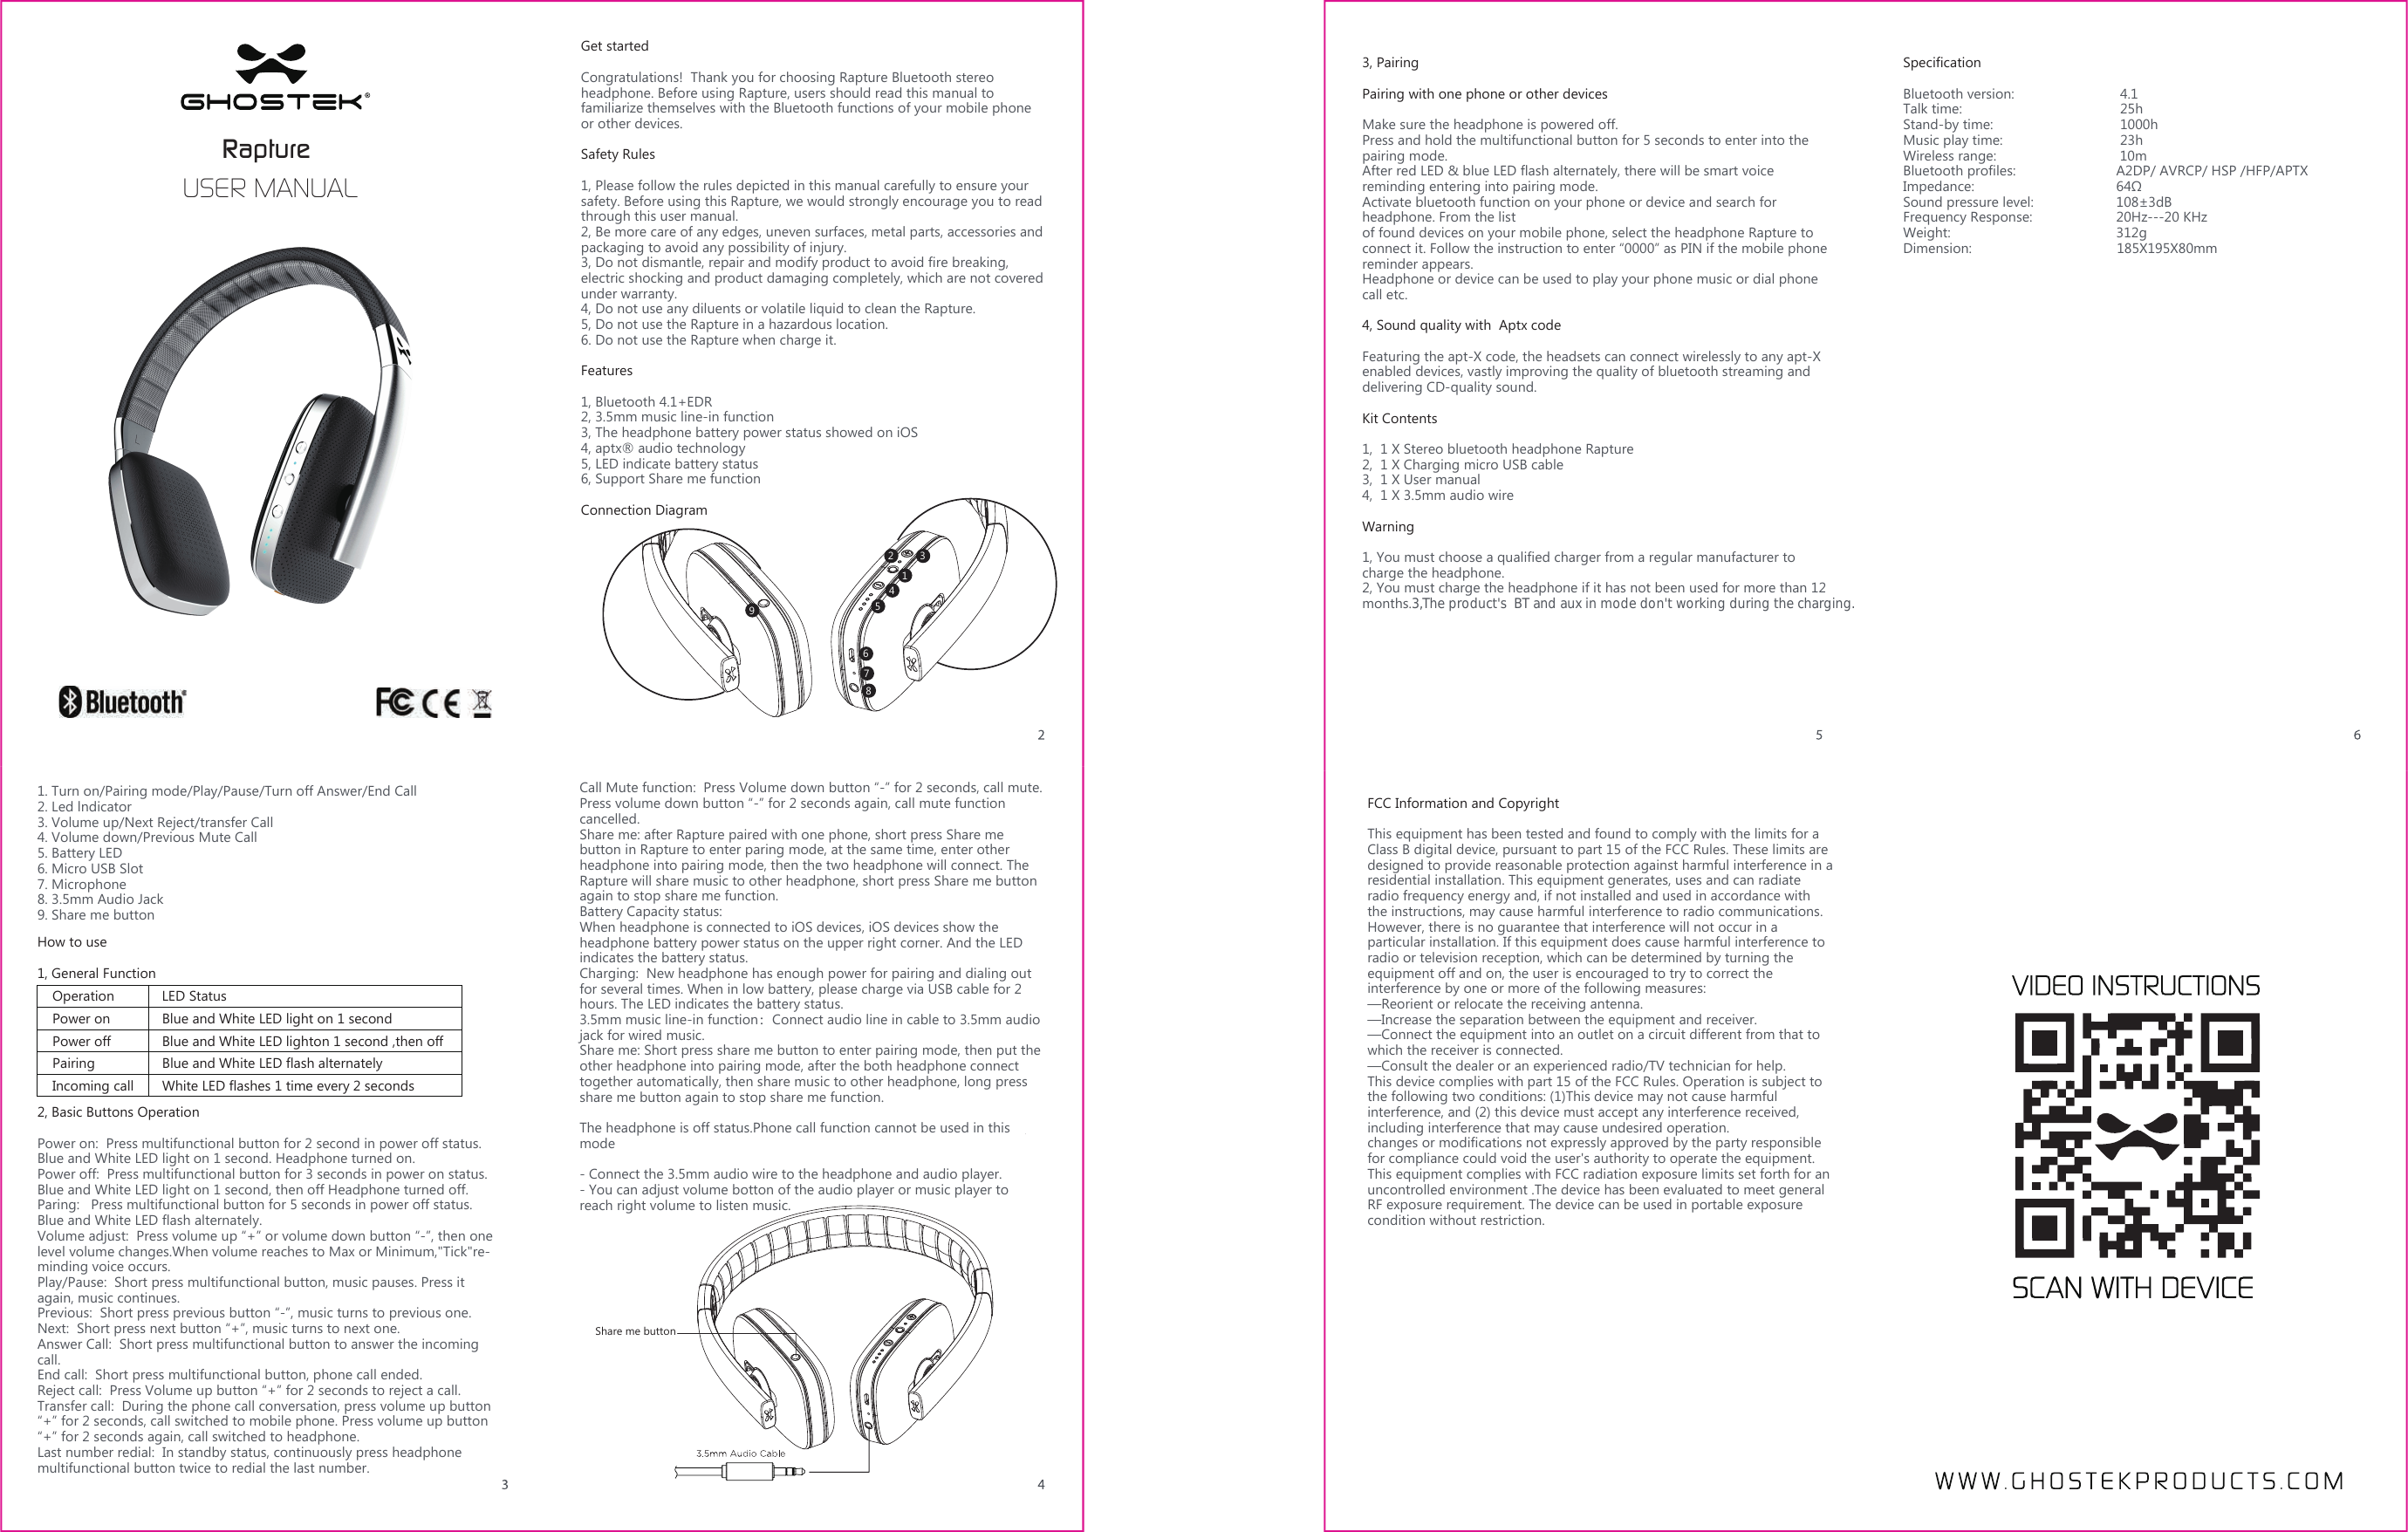 Get started Congratulations!  Thank you for choosing Rapture Bluetooth stereo headphone. Before using Rapture, users should read this manual to familiarize themselves with the Bluetooth functions of your mobile phone or other devices.Safety Rules1, Please follow the rules depicted in this manual carefully to ensure your safety. Before using this Rapture, we would strongly encourage you to read through this user manual.2, Be more care of any edges, uneven surfaces, metal parts, accessories and packaging to avoid any possibility of injury.3, Do not dismantle, repair and modify product to avoid fire breaking, electric shocking and product damaging completely, which are not covered under warranty.4, Do not use any diluents or volatile liquid to clean the Rapture.5, Do not use the Rapture in a hazardous location.6. Do not use the Rapture when charge it.Features1, Bluetooth 4.1+EDR 2, 3.5mm music line-in function3, The headphone battery power status showed on iOS 4, aptx® audio technology 5, LED indicate battery status6, Support Share me functionConnection DiagramHow to use1, General Function 2, Basic Buttons OperationPower on:  Press multifunctional button for 2 second in power off status. Blue and White LED light on 1 second. Headphone turned on. Power off:  Press multifunctional button for 3 seconds in power on status. Blue and White LED light on 1 second, then off Headphone turned off.Paring:   Press multifunctional button for 5 seconds in power off status. Blue and White LED flash alternately. Volume adjust:  Press volume up “+” or volume down button “-”, then one level volume changes.When volume reaches to Max or Minimum,&quot;Tick&quot;re-minding voice occurs.Play/Pause:  Short press multifunctional button, music pauses. Press it again, music continues.Previous:  Short press previous button “-”, music turns to previous one.Next:  Short press next button “+”, music turns to next one.Answer Call:  Short press multifunctional button to answer the incoming call.End call:  Short press multifunctional button, phone call ended.Reject call:  Press Volume up button “+” for 2 seconds to reject a call.Transfer call:  During the phone call conversation, press volume up button “+” for 2 seconds, call switched to mobile phone. Press volume up button “+” for 2 seconds again, call switched to headphone.   Last number redial:  In standby status, continuously press headphone multifunctional button twice to redial the last number.Operation1. Turn on/Pairing mode/Play/Pause/Turn off Answer/End Call2. Led lndicator3. Volume up/Next Reject/transfer Call4. Volume down/Previous Mute Call5. Battery LED6. Micro USB Slot7. Microphone8. 3.5mm Audio Jack9. Share me buttonLED StatusPower on Blue and White LED light on 1 second Power off Blue and White LED lighton 1 second ,then offPairing Blue and White LED flash alternatelyIncoming call White LED flashes 1 time every 2 secondsCall Mute function:  Press Volume down button “-” for 2 seconds, call mute. Press volume down button “-” for 2 seconds again, call mute function cancelled.Share me: after Rapture paired with one phone, short press Share me button in Rapture to enter paring mode, at the same time, enter other headphone into pairing mode, then the two headphone will connect. The Rapture will share music to other headphone, short press Share me button again to stop share me function.Battery Capacity status: When headphone is connected to iOS devices, iOS devices show the headphone battery power status on the upper right corner. And the LED indicates the battery status.Charging:  New headphone has enough power for pairing and dialing out for several times. When in low battery, please charge via USB cable for 2 hours. The LED indicates the battery status.3.5mm music line-in function：Connect audio line in cable to 3.5mm audio jack for wired music.Share me: Short press share me button to enter pairing mode, then put the other headphone into pairing mode, after the both headphone connect together automatically, then share music to other headphone, long press share me button again to stop share me function.The headphone is off status.Phone call function cannot be used in this mode- Connect the 3.5mm audio wire to the headphone and audio player.- You can adjust volume botton of the audio player or music player to reach right volume to listen music.3, PairingPairing with one phone or other devicesMake sure the headphone is powered off.Press and hold the multifunctional button for 5 seconds to enter into the pairing mode.After red LED &amp; blue LED flash alternately, there will be smart voice reminding entering into pairing mode. Activate bluetooth function on your phone or device and search for headphone. From the list of found devices on your mobile phone, select the headphone Rapture to connect it. Follow the instruction to enter “0000” as PIN if the mobile phone reminder appears.Headphone or device can be used to play your phone music or dial phone call etc.4, Sound quality with  Aptx codeFeaturing the apt-X code, the headsets can connect wirelessly to any apt-X enabled devices, vastly improving the quality of bluetooth streaming and delivering CD-quality sound.Kit Contents1,  1 X Stereo bluetooth headphone Rapture 2,  1 X Charging micro USB cable3,  1 X User manual4,  1 X 3.5mm audio wireWarning 1, You must choose a qualified charger from a regular manufacturer to charge the headphone.2, You must charge the headphone if it has not been used for more than 12 months.3,The product&apos;s  BT and aux in mode don&apos;t working during the charging.SpecificationBluetooth version:         4.1Talk time:          25h Stand-by time:        1000hMusic play time:        23h Wireless range:        10mBluetooth profiles:       A2DP/ AVRCP/ HSP /HFP/APTXImpedance:         64ΩSound pressure level:      108±3dBFrequency Response:     20Hz---20 KHzWeight:     312gDimension:                                    185X195X80mmRapture USER MANUAL321456789Share me buttonFCC Information and Copyright This equipment has been tested and found to comply with the limits for a Class B digital device, pursuant to part 15 of the FCC Rules. These limits are designed to provide reasonable protection against harmful interference in a residential installation. This equipment generates, uses and can radiate radio frequency energy and, if not installed and used in accordance with the instructions, may cause harmful interference to radio communications. However, there is no guarantee that interference will not occur in a particular installation. If this equipment does cause harmful interference to radio or television reception, which can be determined by turning the equipment off and on, the user is encouraged to try to correct the interference by one or more of the following measures: —Reorient or relocate the receiving antenna. —Increase the separation between the equipment and receiver. —Connect the equipment into an outlet on a circuit different from that to which the receiver is connected. —Consult the dealer or an experienced radio/TV technician for help. This device complies with part 15 of the FCC Rules. Operation is subject to the following two conditions: (1)This device may not cause harmful interference, and (2) this device must accept any interference received, including interference that may cause undesired operation. changes or modifications not expressly approved by the party responsible for compliance could void the user&apos;s authority to operate the equipment. This equipment complies with FCC radiation exposure limits set forth for an uncontrolled environment .The device has been evaluated to meet general RF exposure requirement. The device can be used in portable exposure condition without restriction.